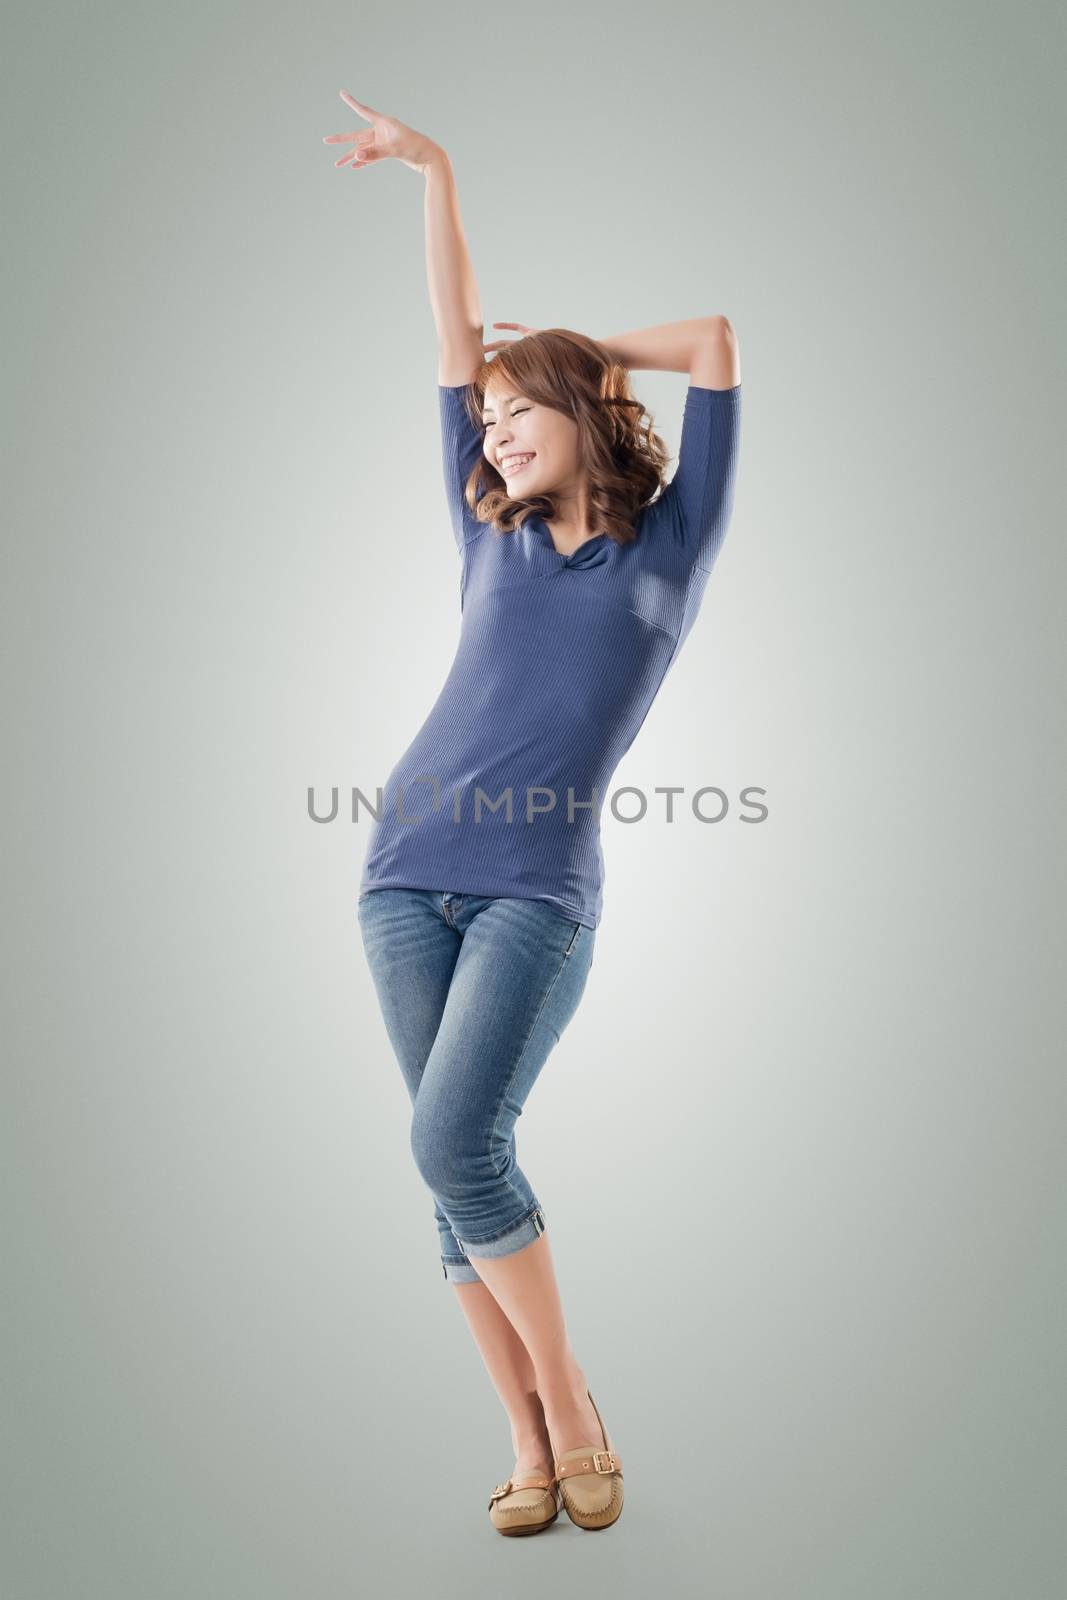 Excited Asian young girl by elwynn